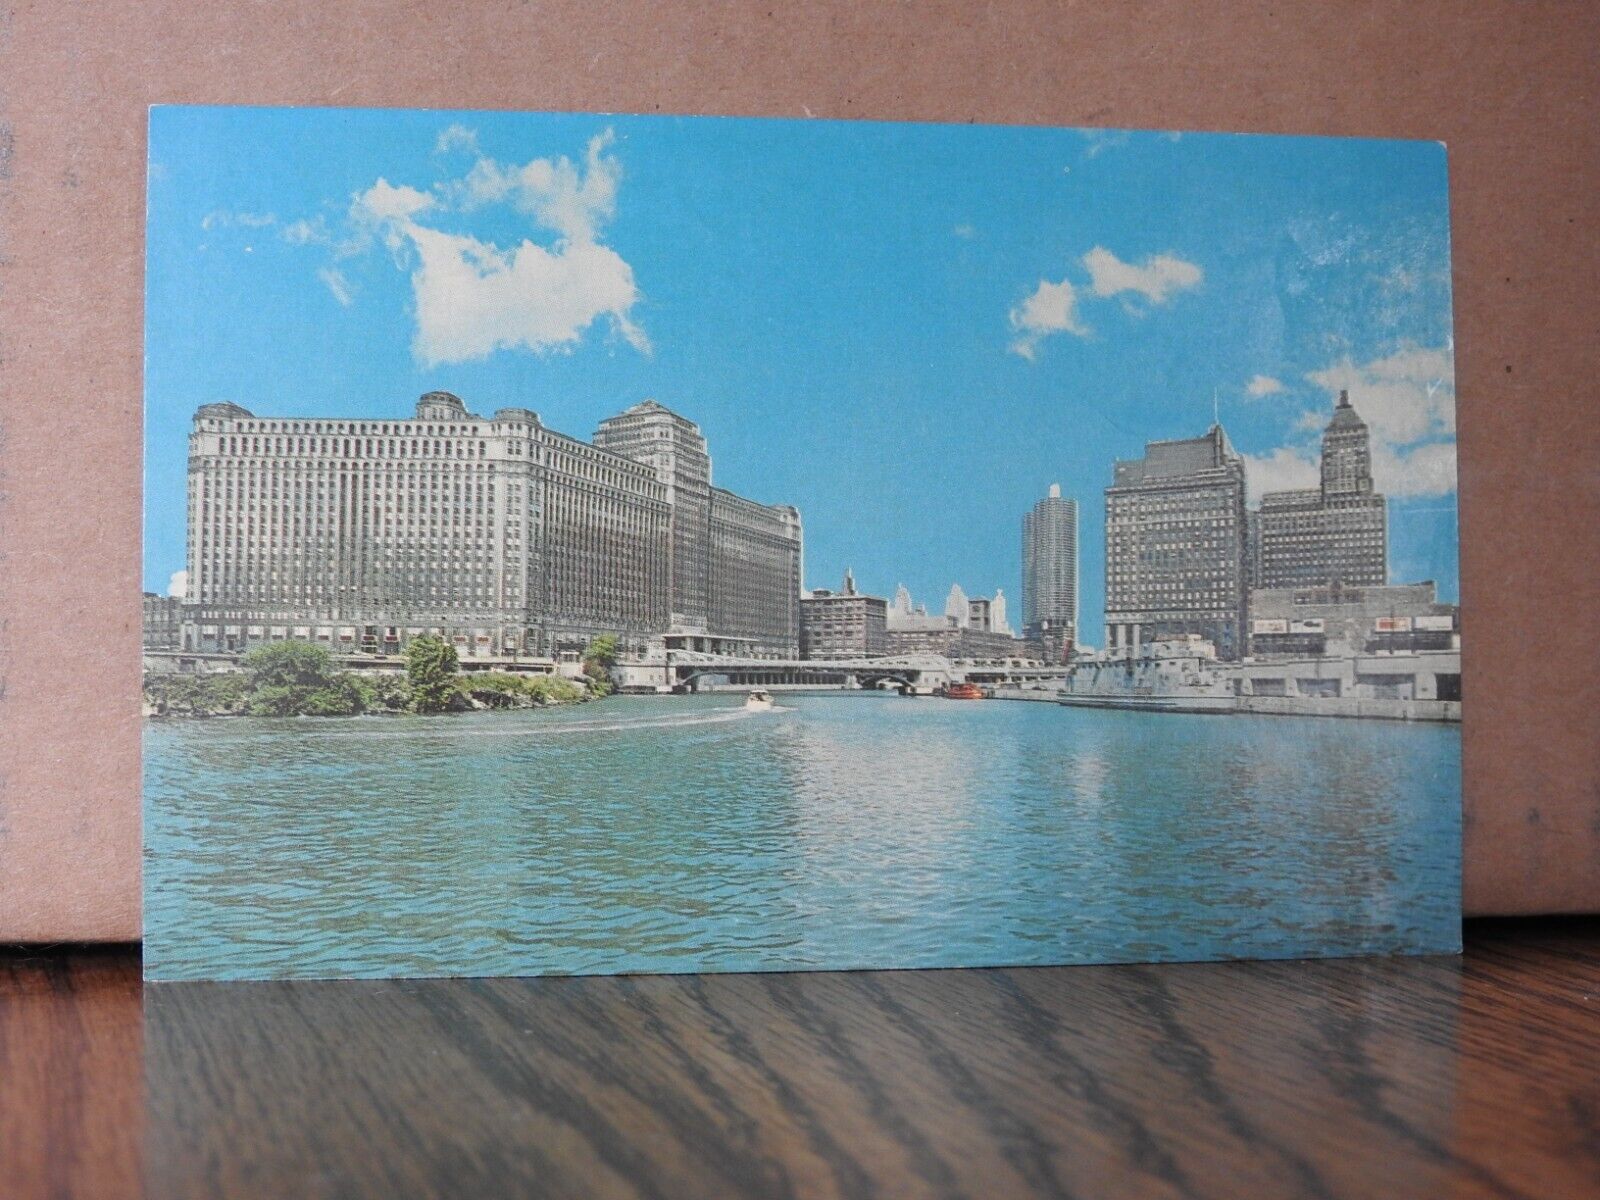 Merchandise Mart-Chicago Skyline Chicago, IL Lithograph Post Card